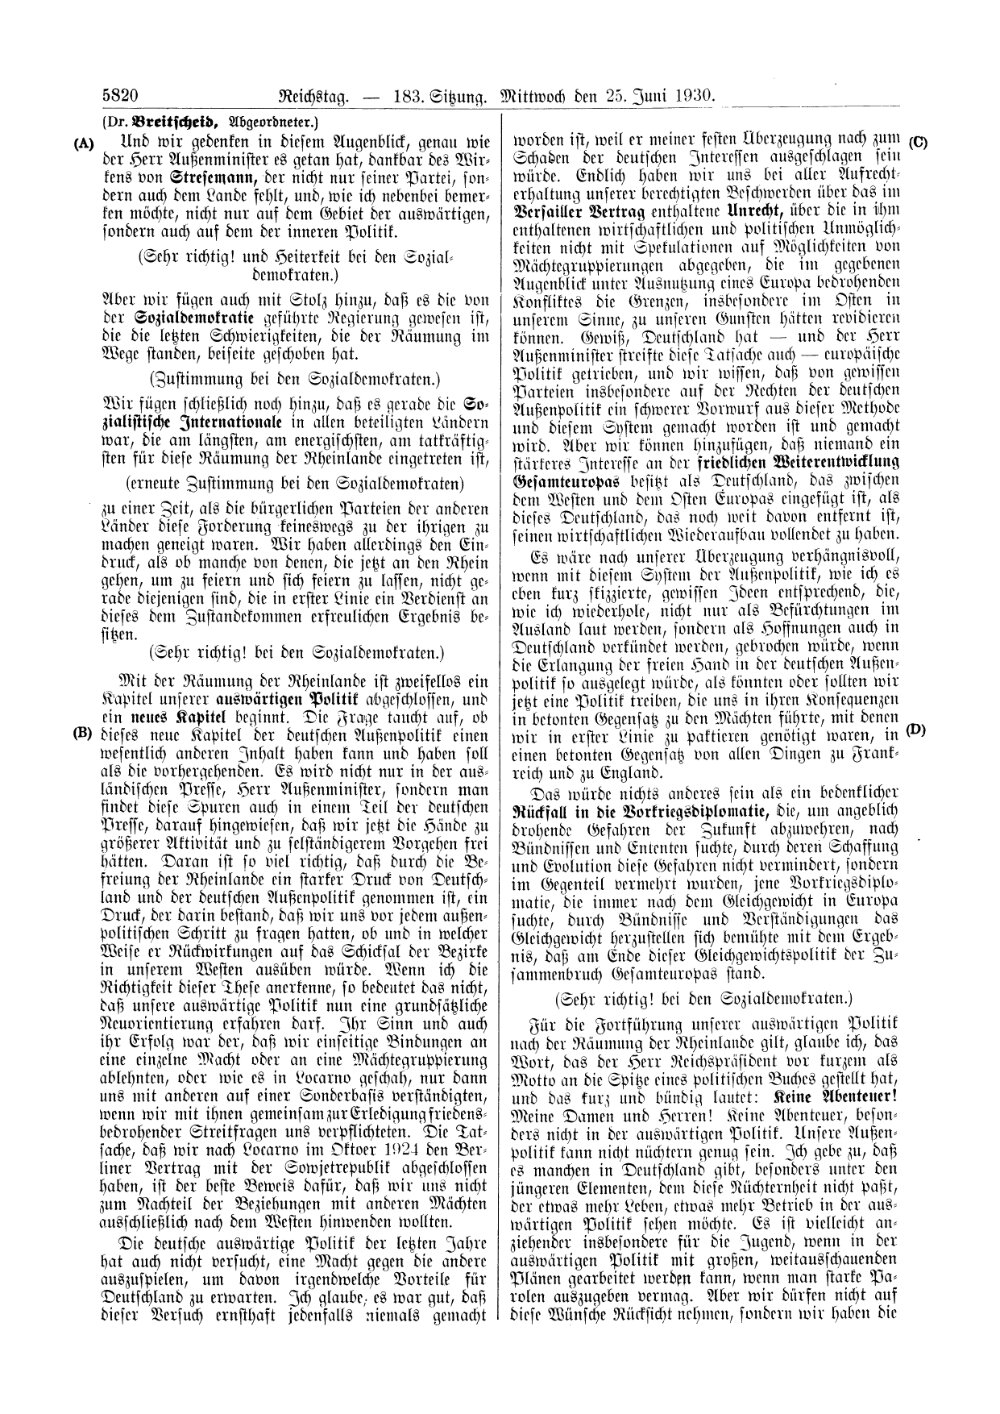 Scan of page 5820